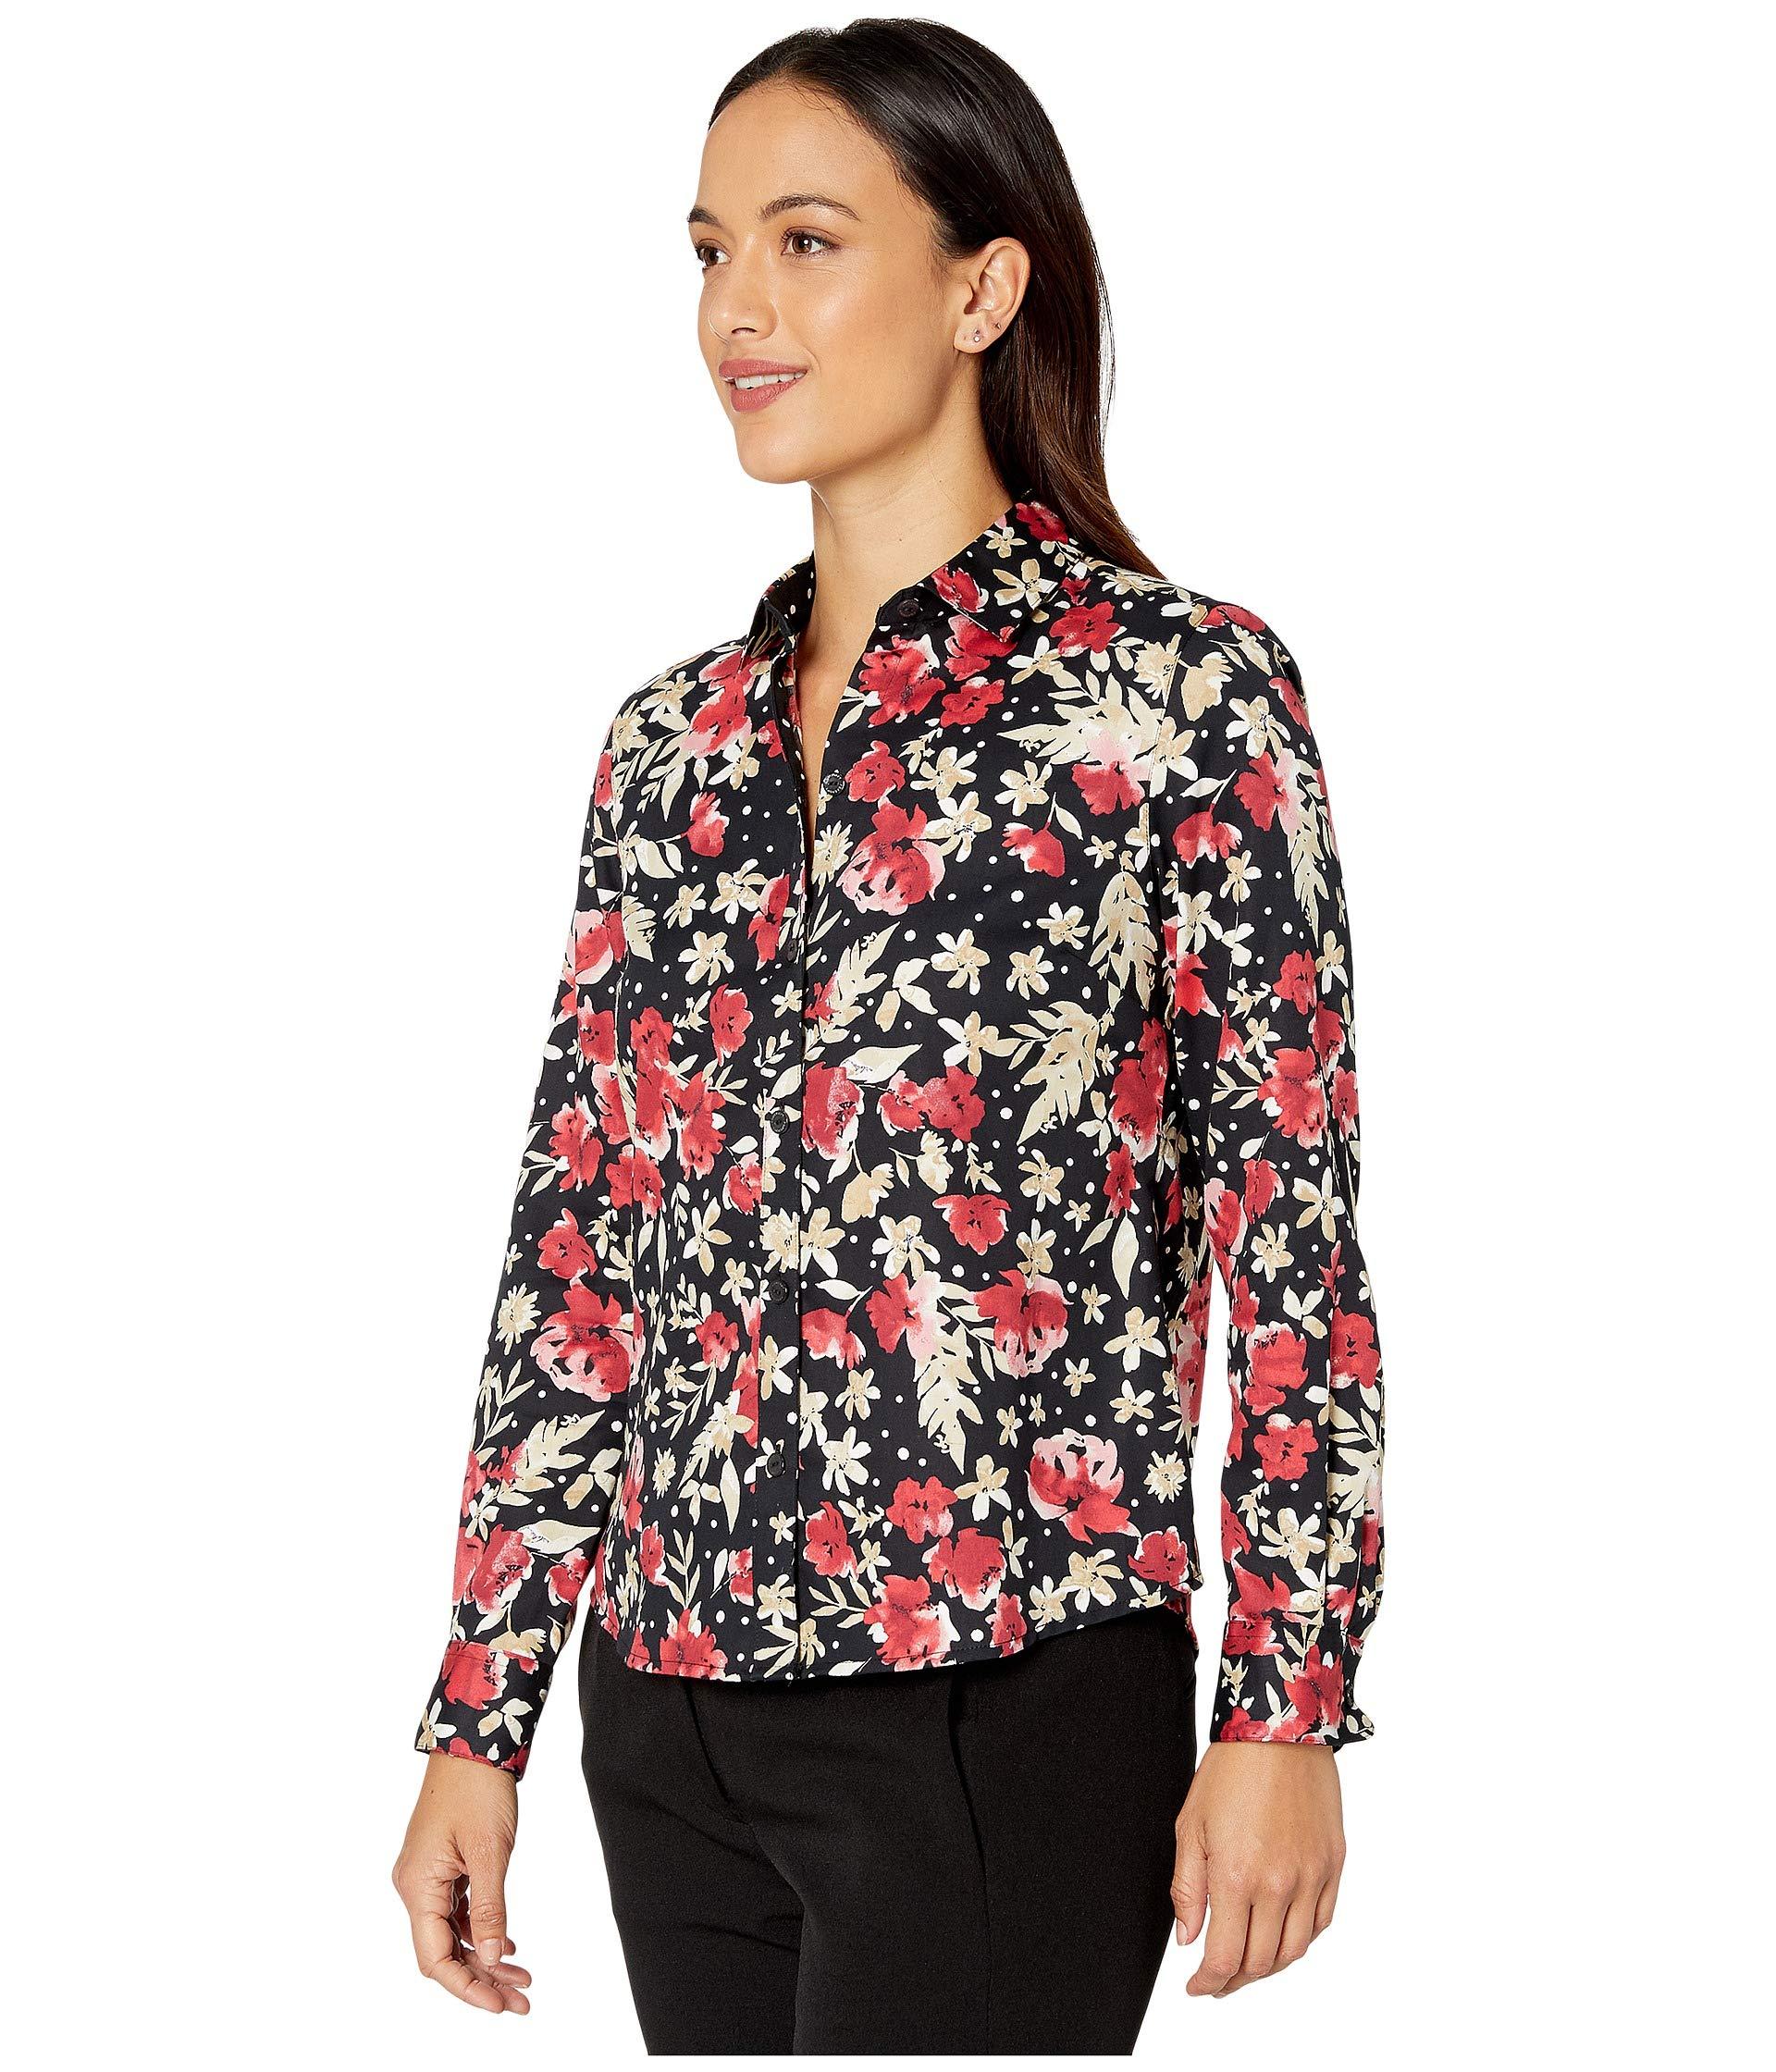 Foxcroft Cotton Petite Wrinkle Free Ava Festive Floral Shirt in Red - Lyst